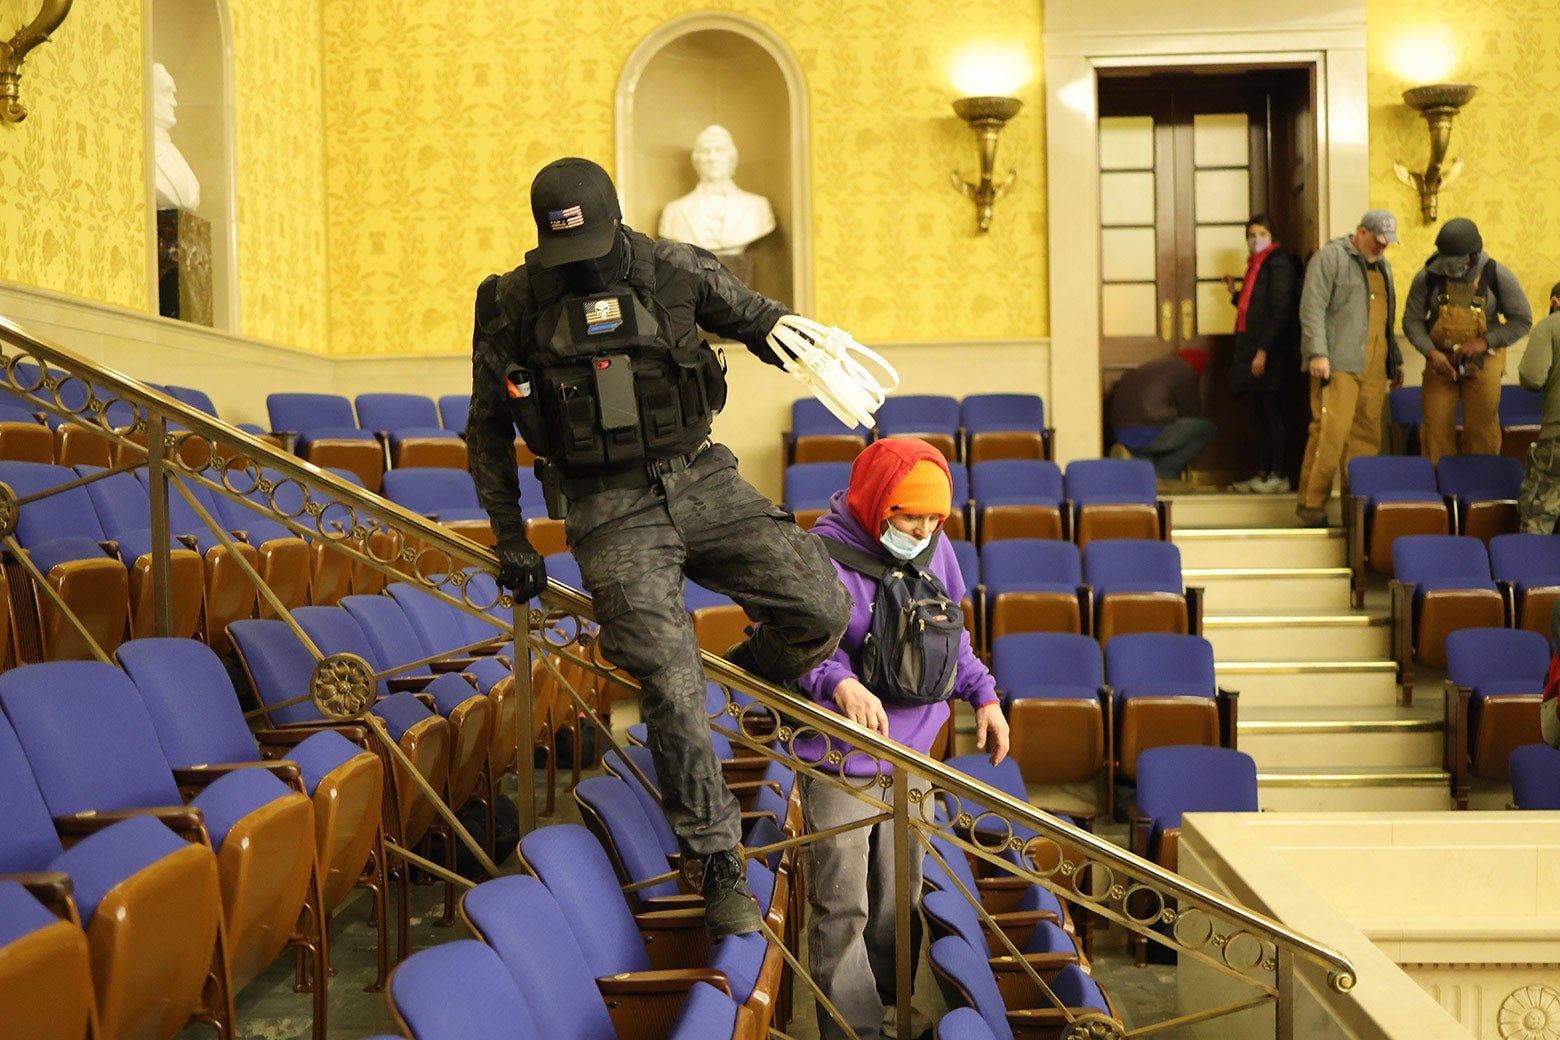 A man wearing black tactical gear and holding zip ties climbs over gallery seats in the Senate chamber.